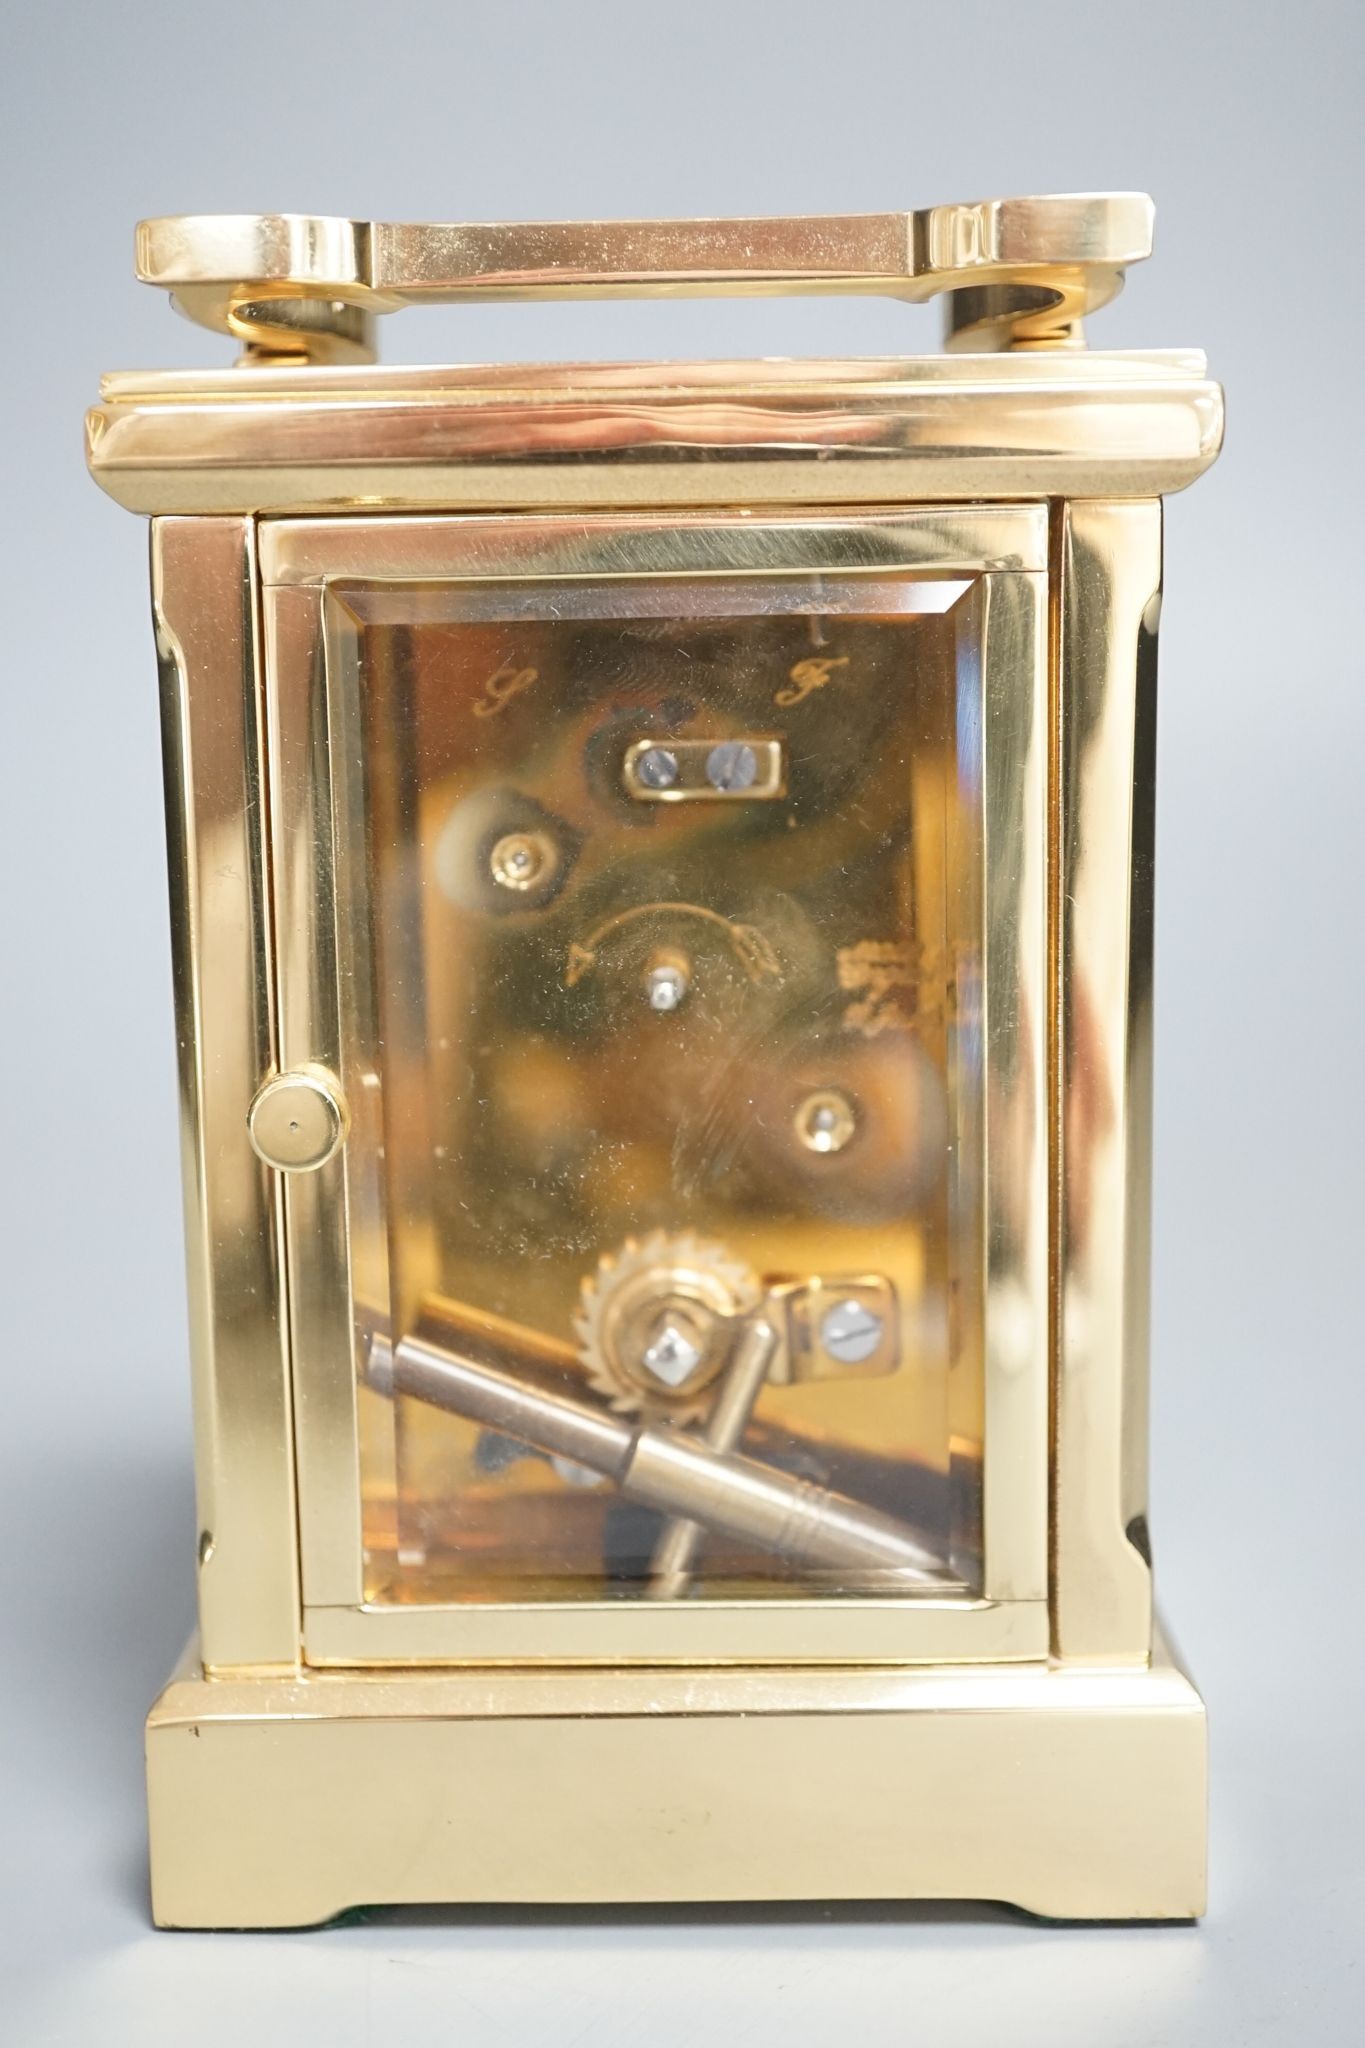 A Thos. Russell &Son brass carriage timepiece with key